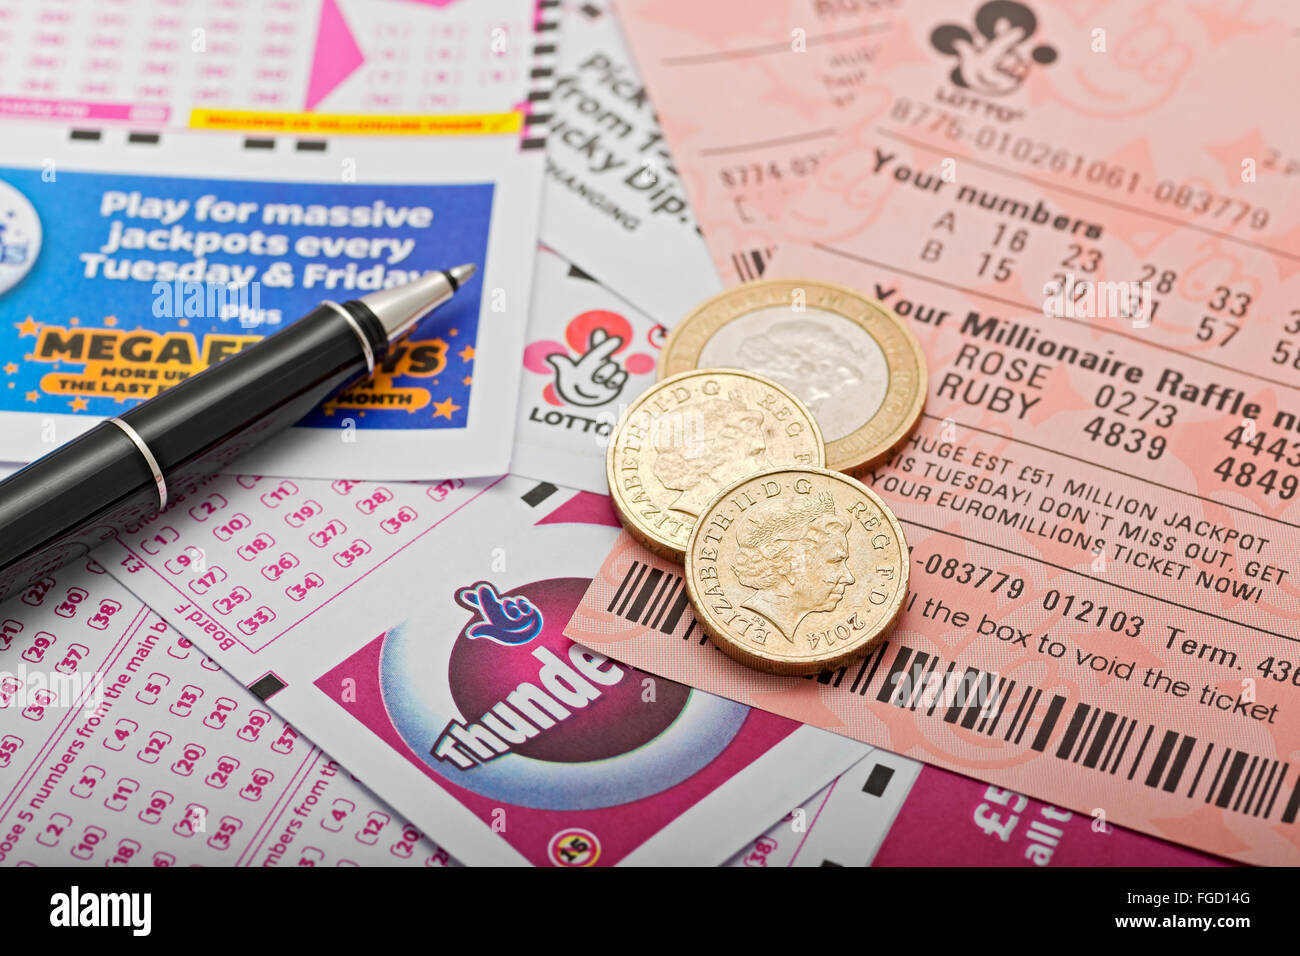 Close up of Lotto National Lottery ticket slip tickets money and slips England UK United Kingdom GB Great Britain Stock Photo